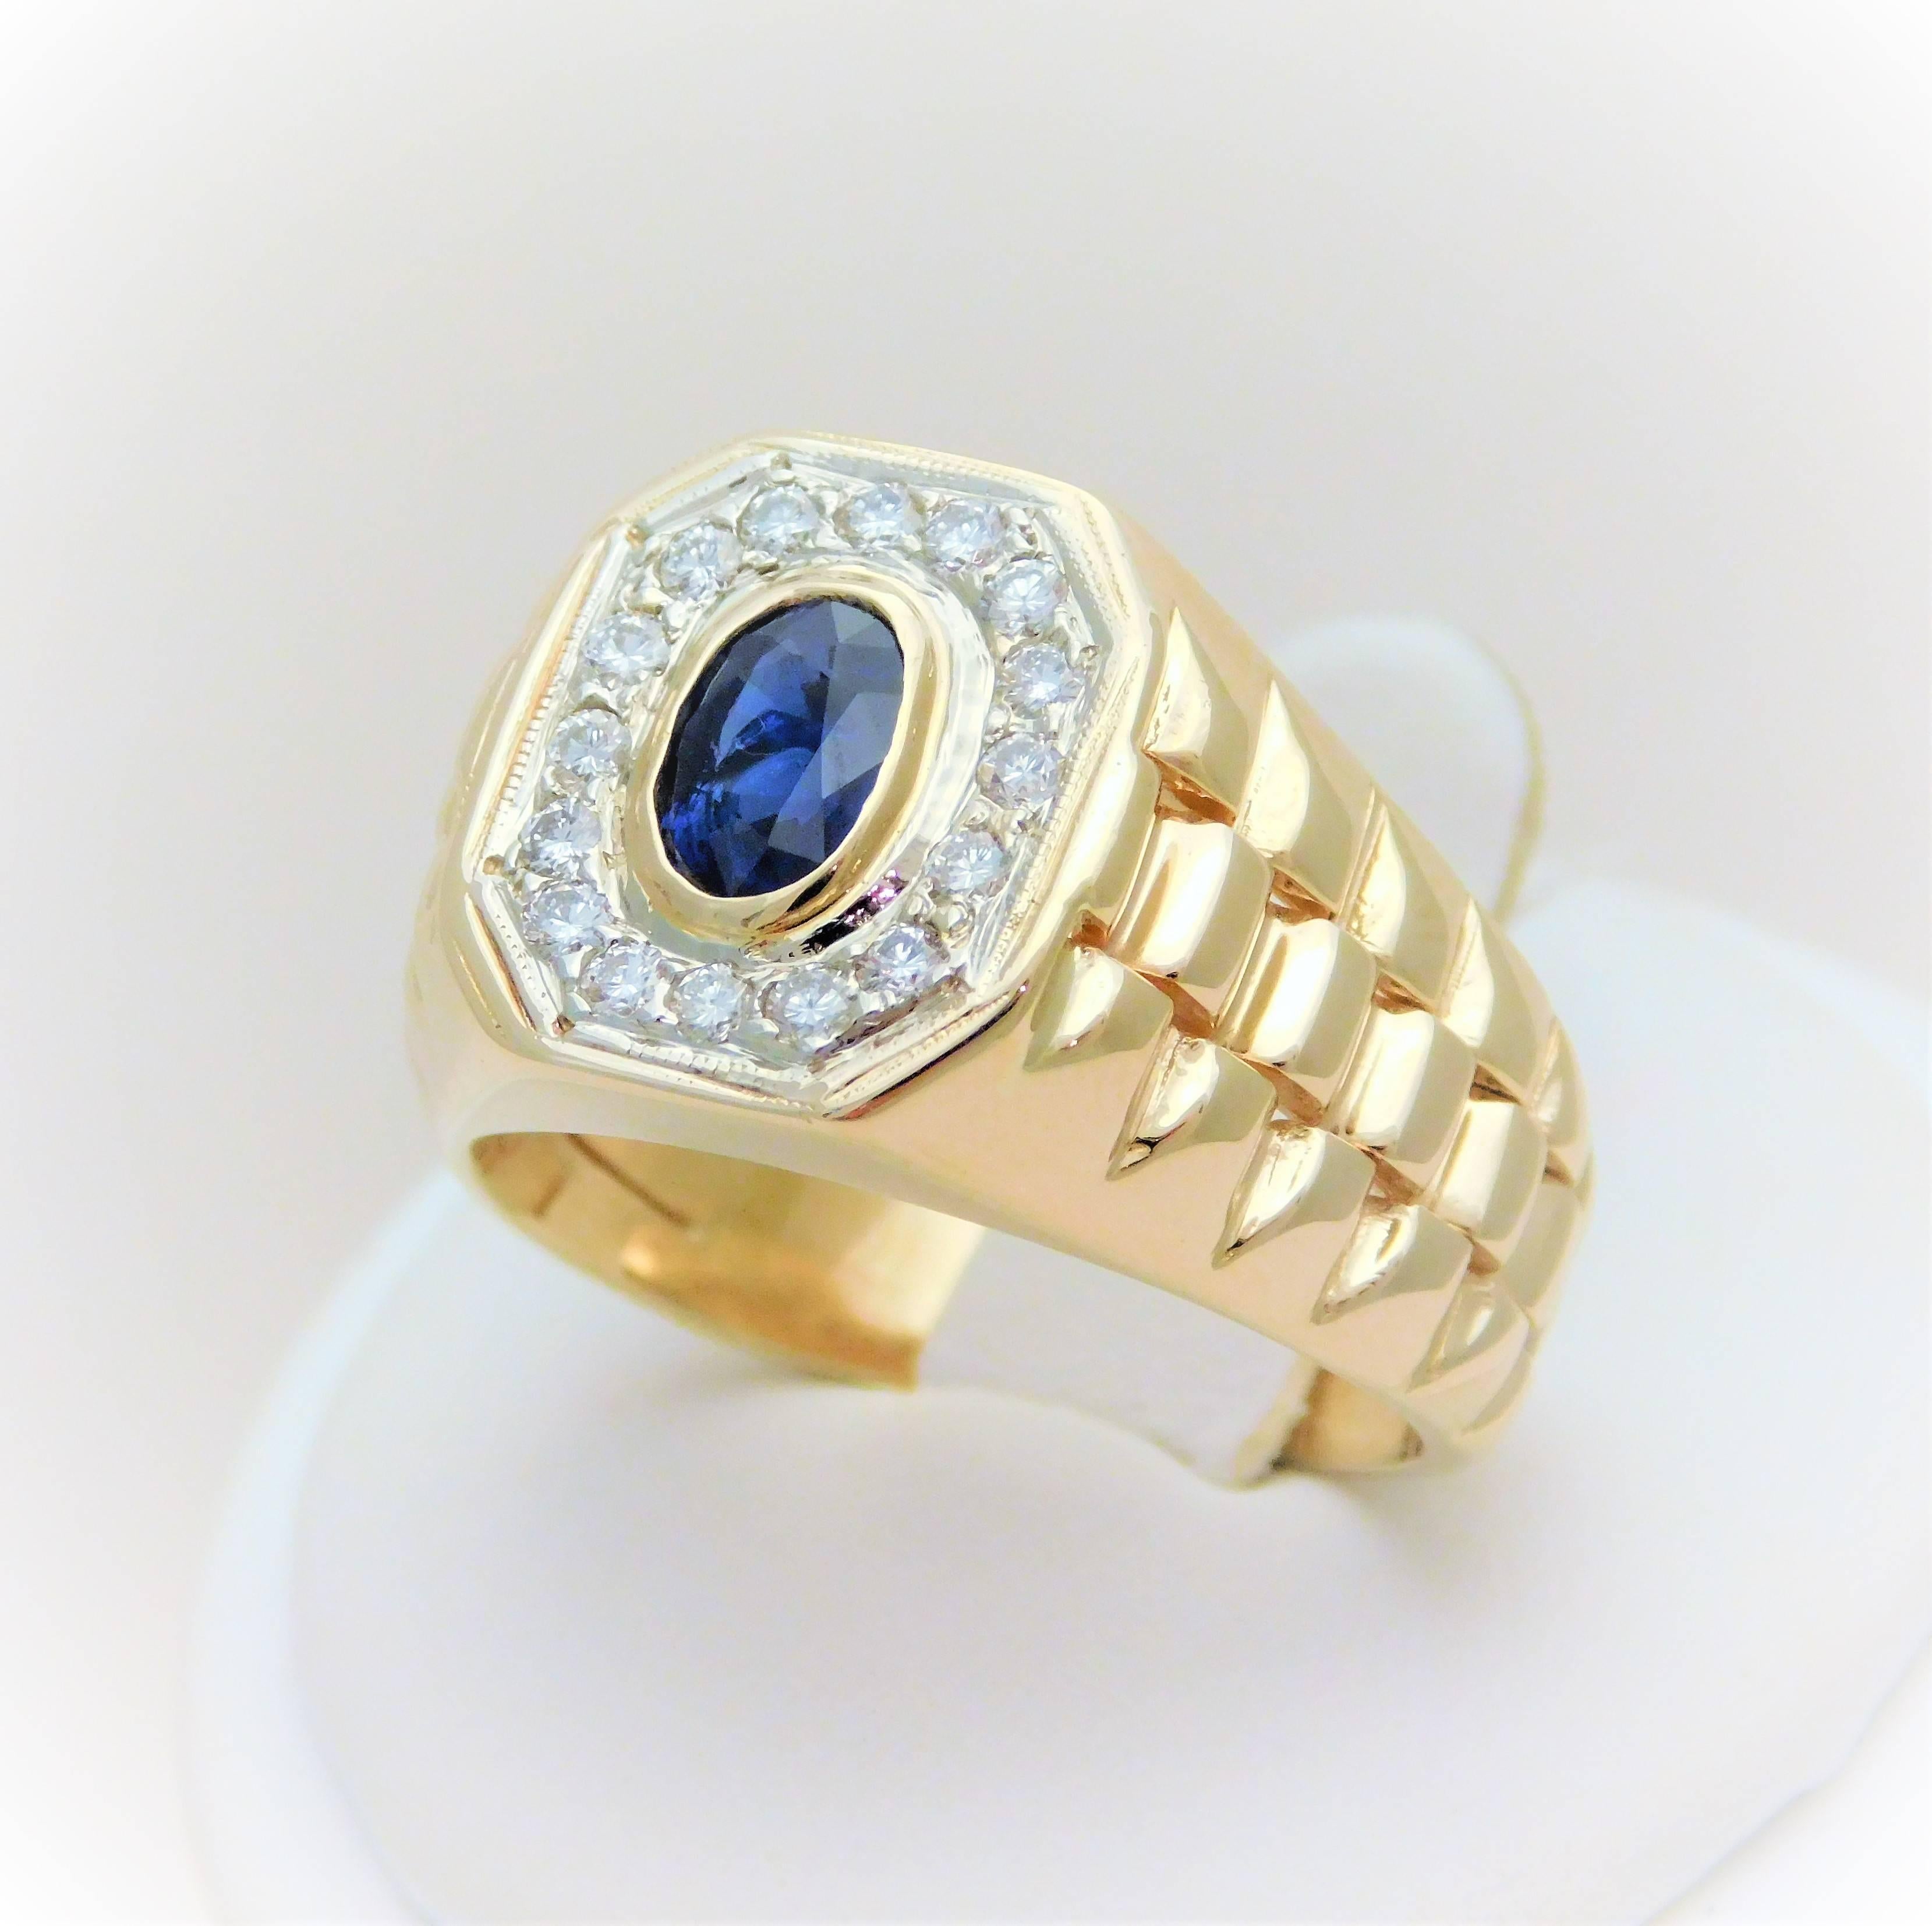 Ancient Romans believed that the blue sapphire guarded one form envy, increased wealth, and protected rulers from harm.  Today this September birthstone is revered as one of the most precious of all the gems.  The most revered sapphires in the world